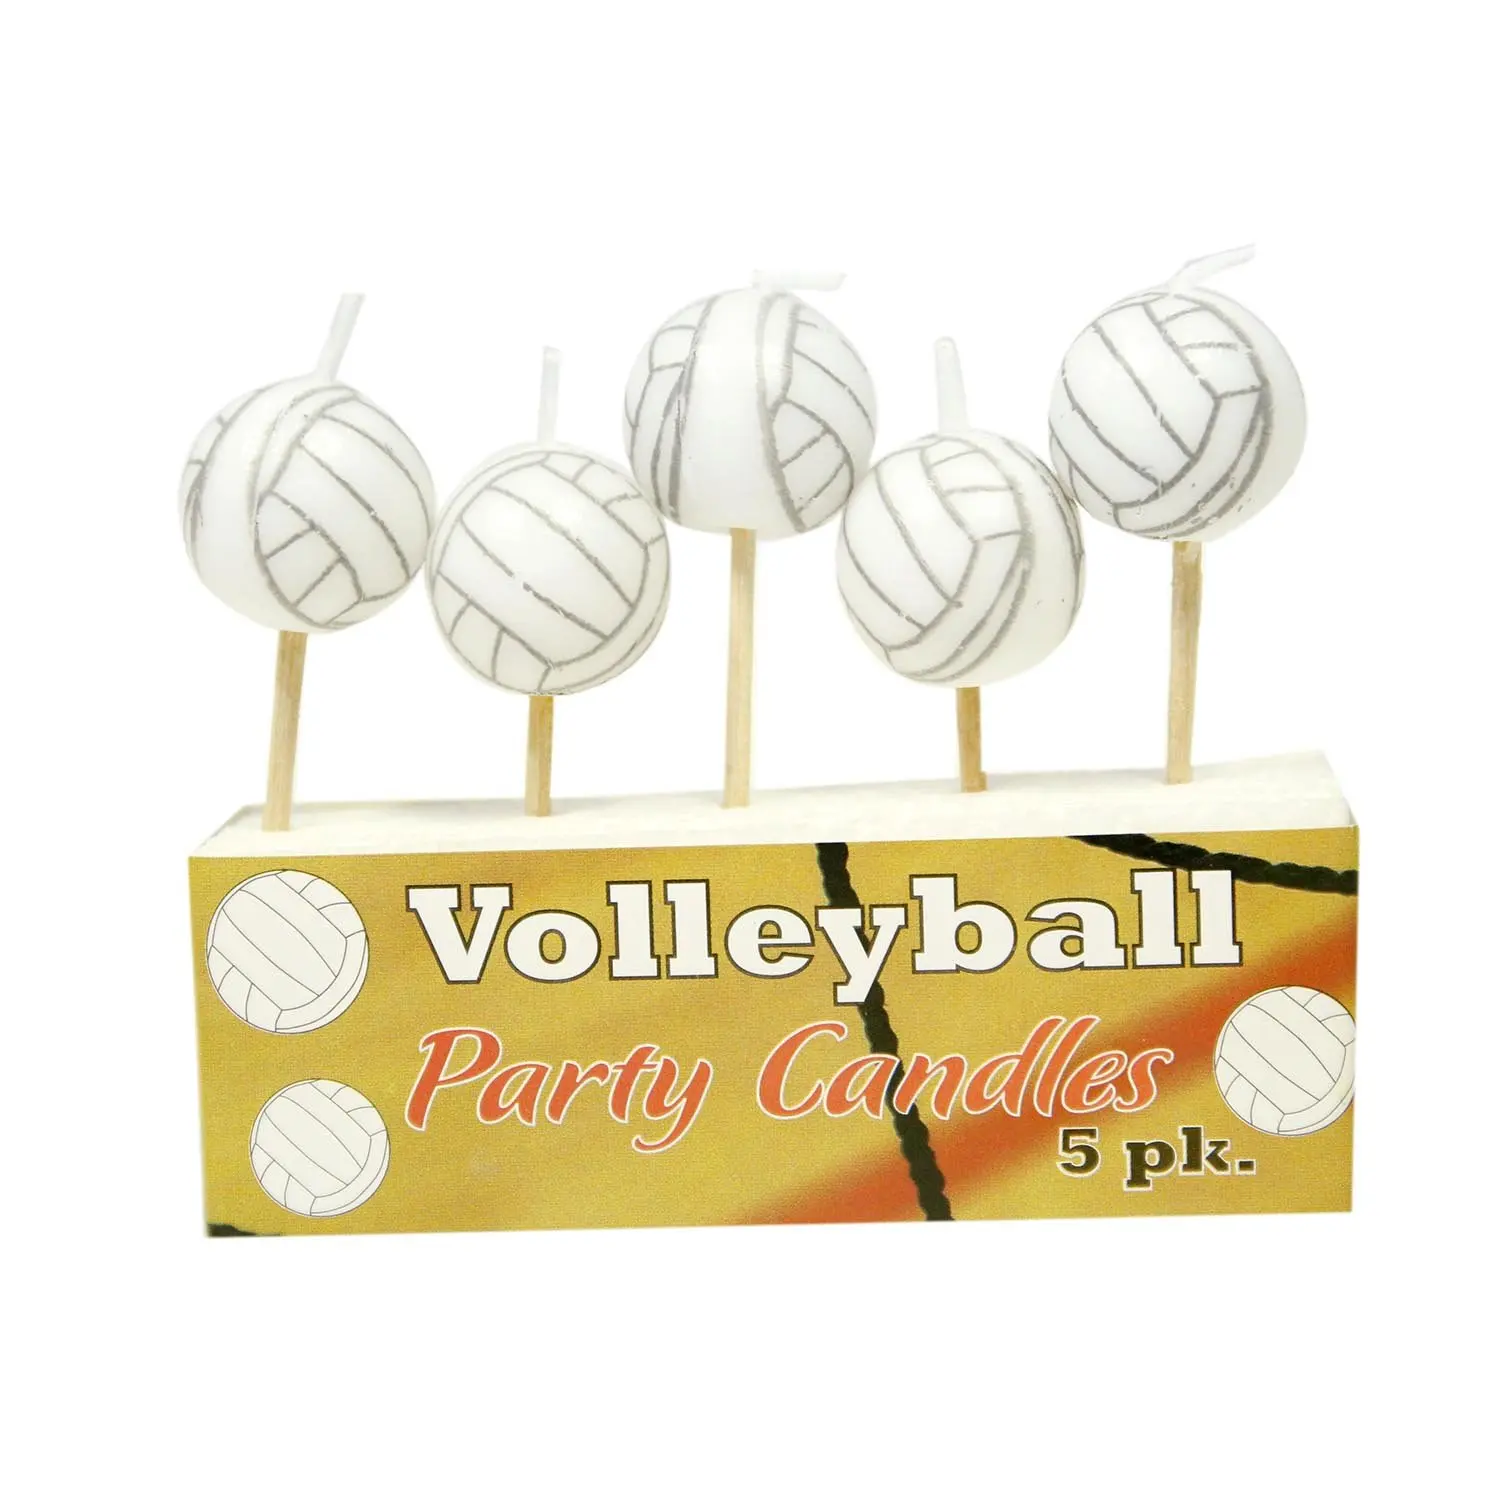 White Motor Activity Toys 6pcs 18 Inch Volleyball Balloons